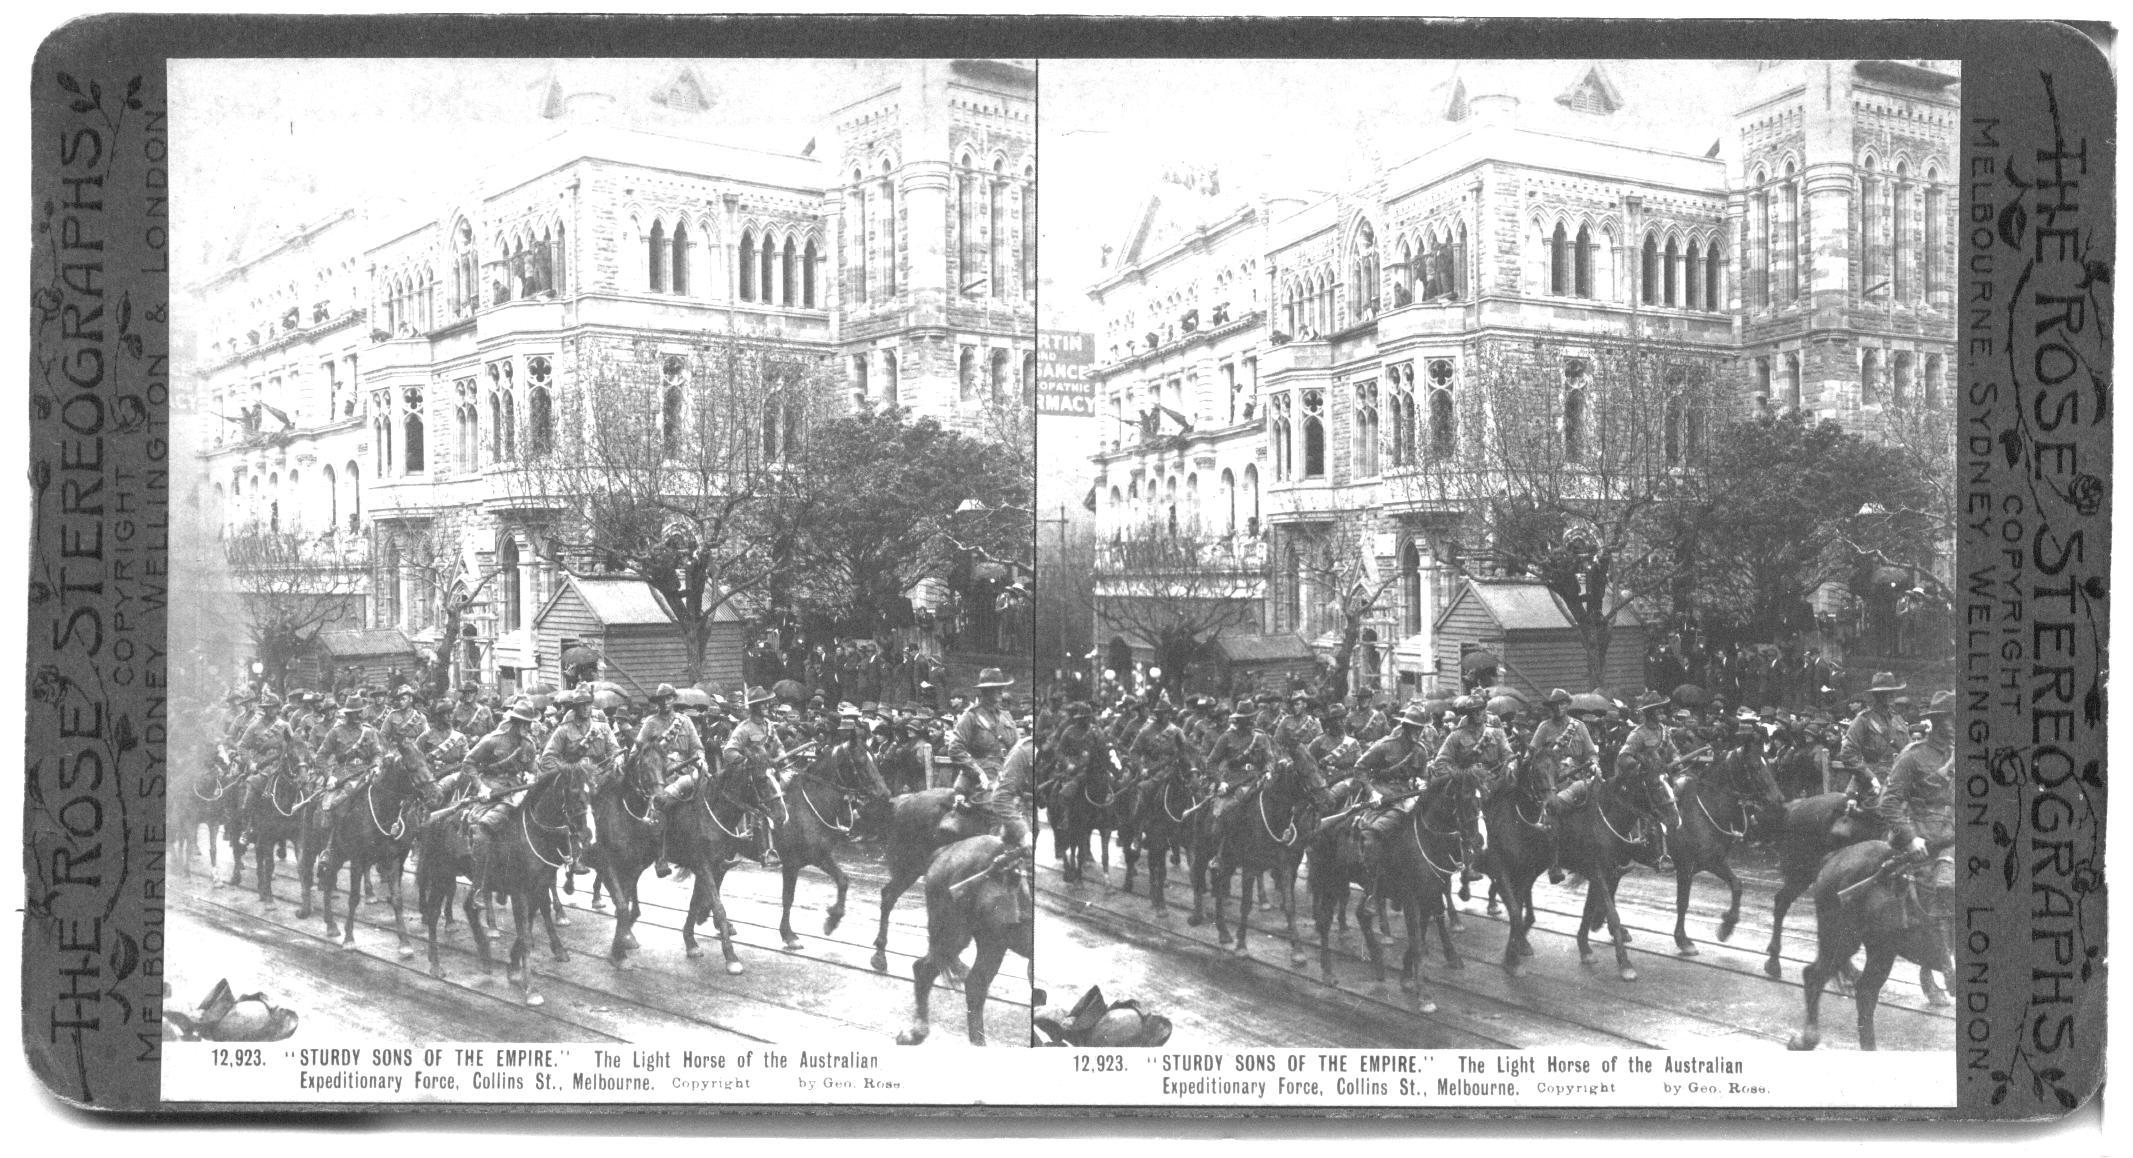 “STURDY SONS OF THE EMPIRE.” The Light Horse of the Australian Expeditionary Force, Collins St., Melbourne.